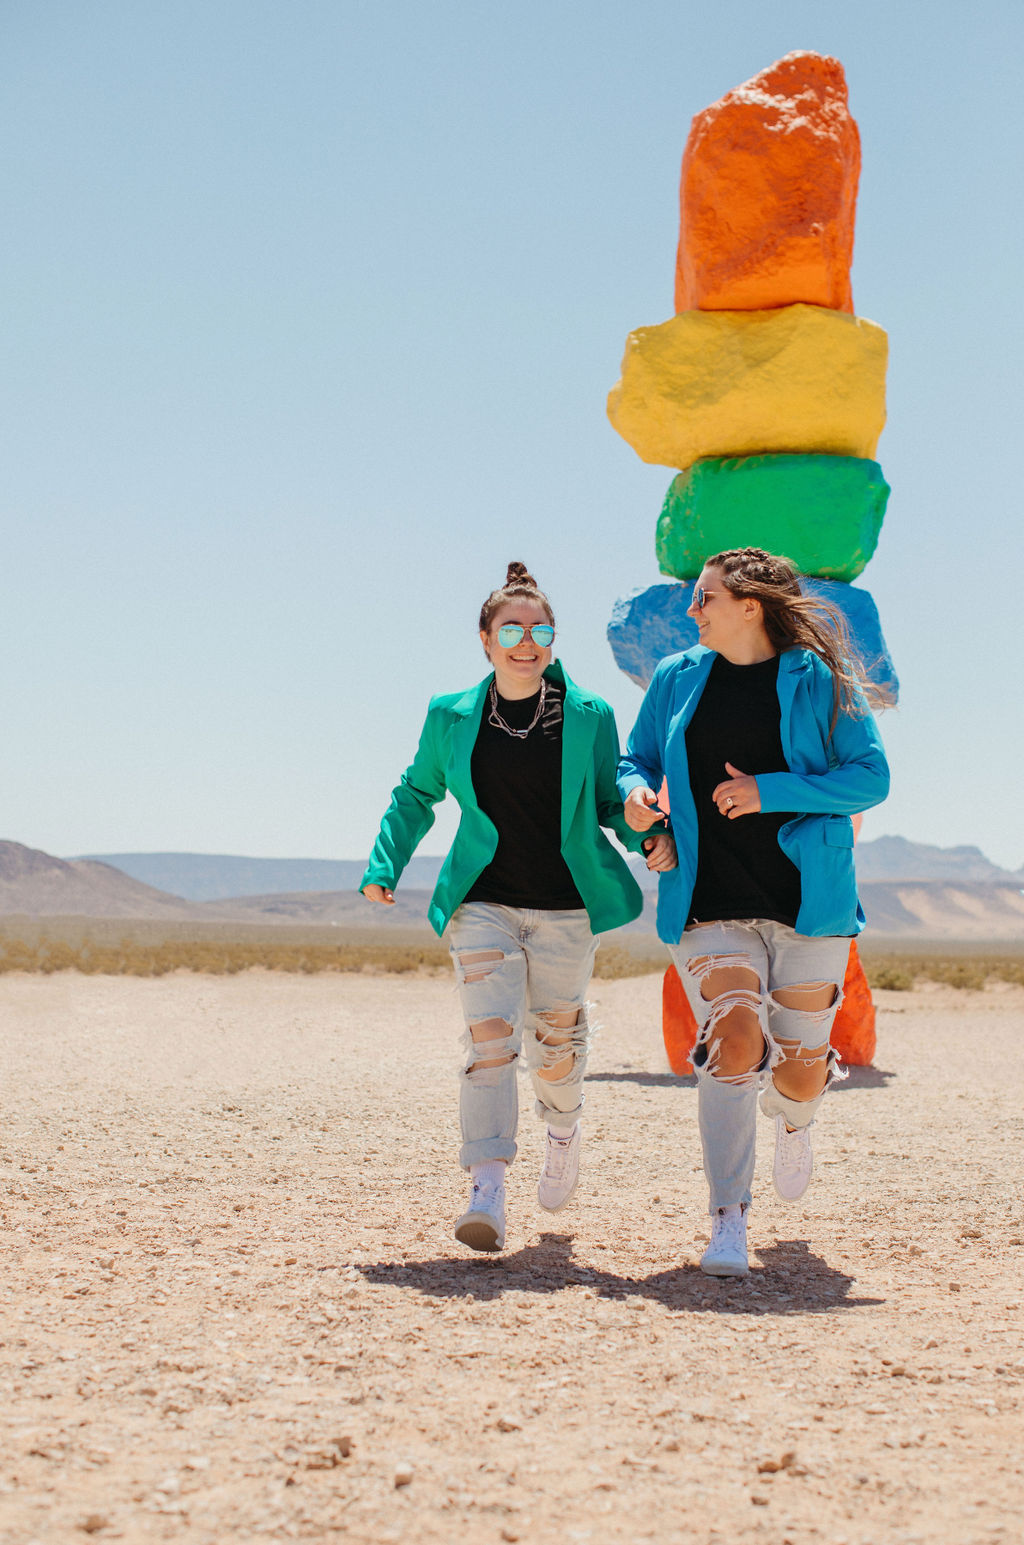 Two women holding hands and running in a desert with a stack of colorful rocks behind them.